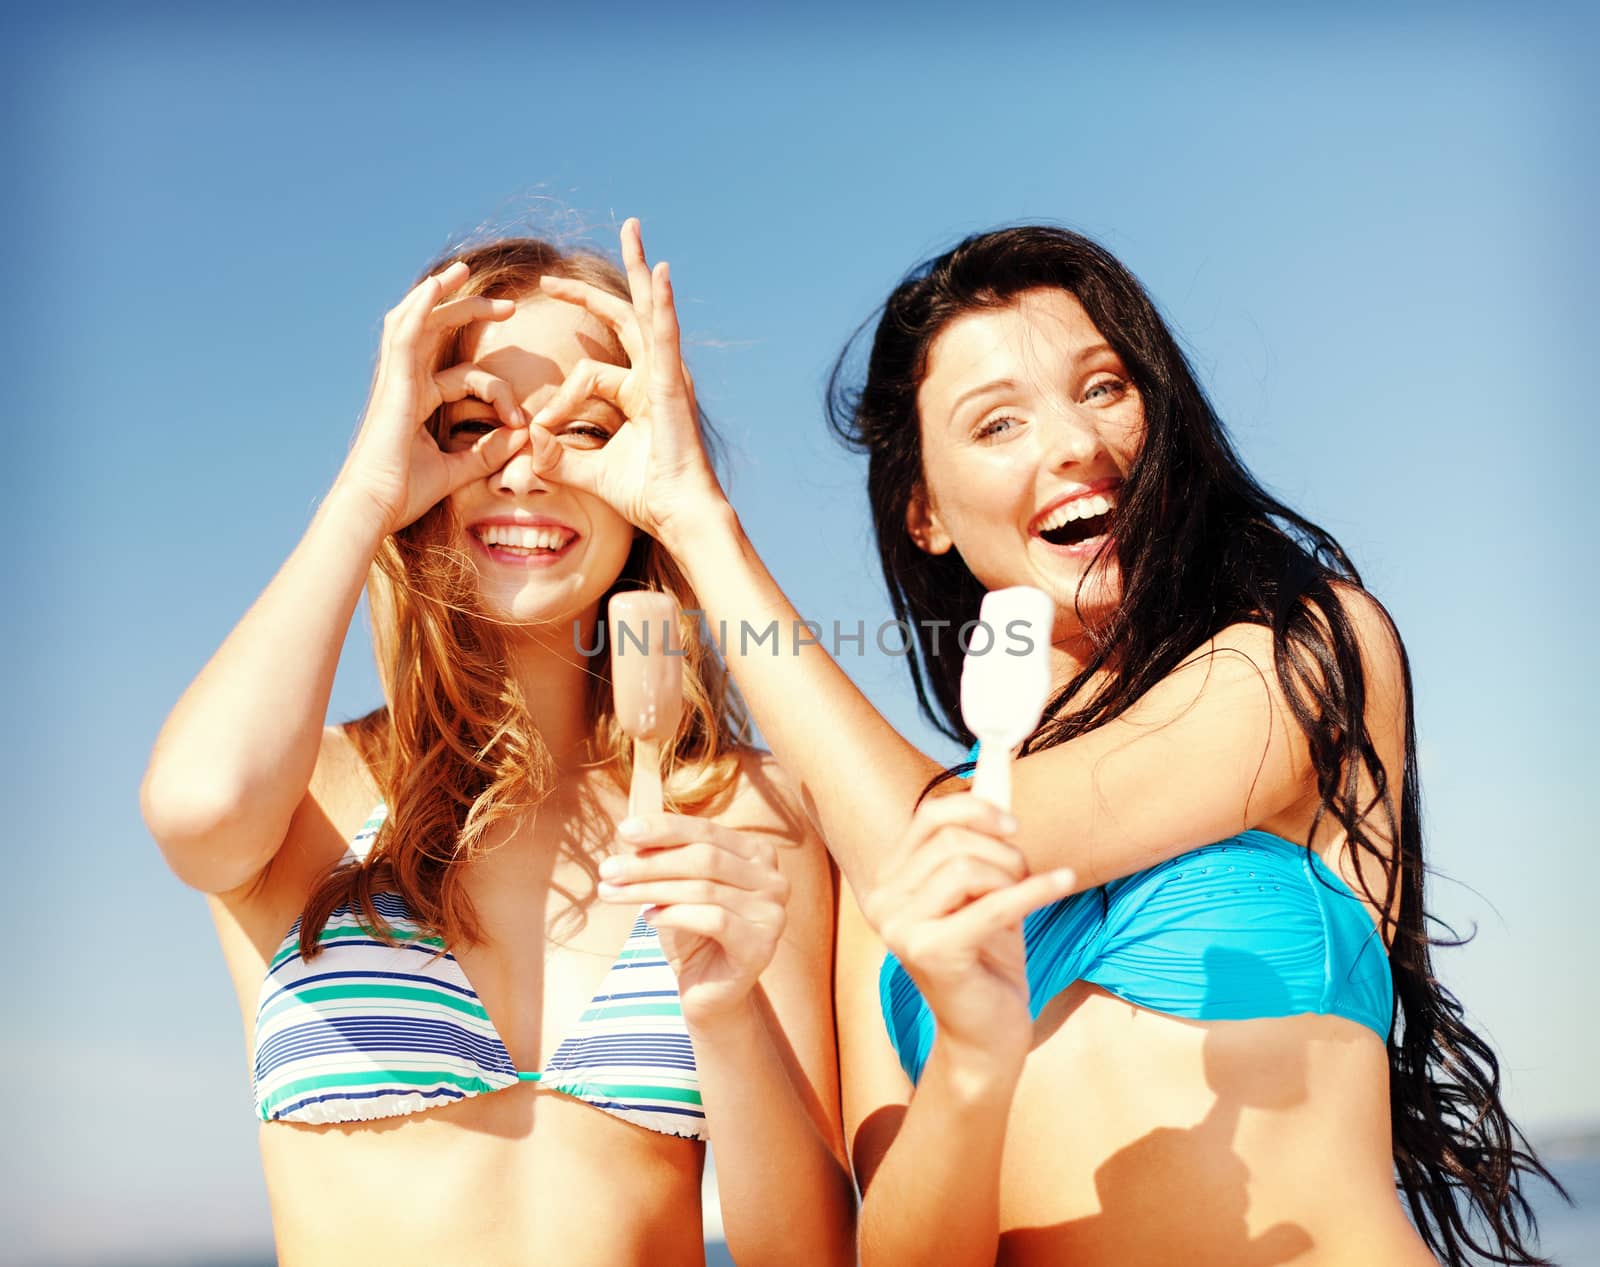 summer holidays and vacation - girls in bikinis eating ice cream on the beach